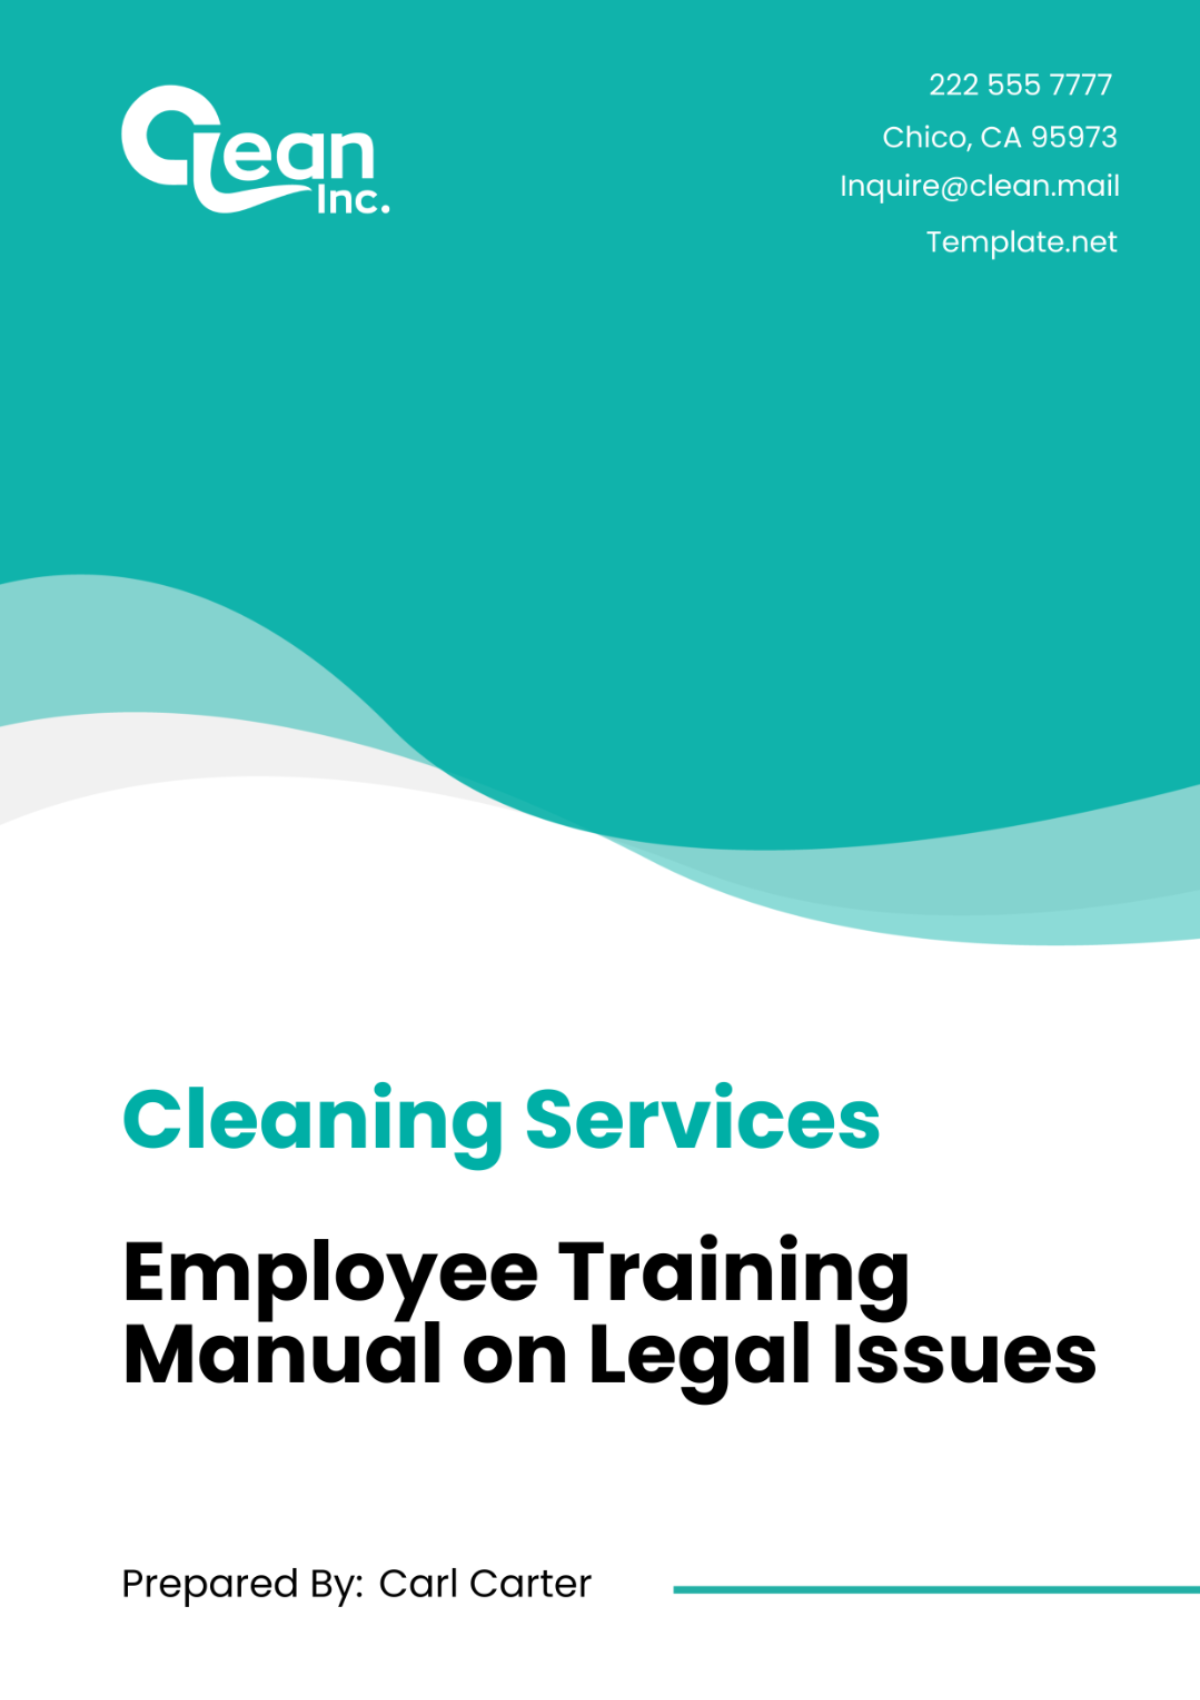 Free Cleaning Services Employee Training Manual on Legal Issues Template